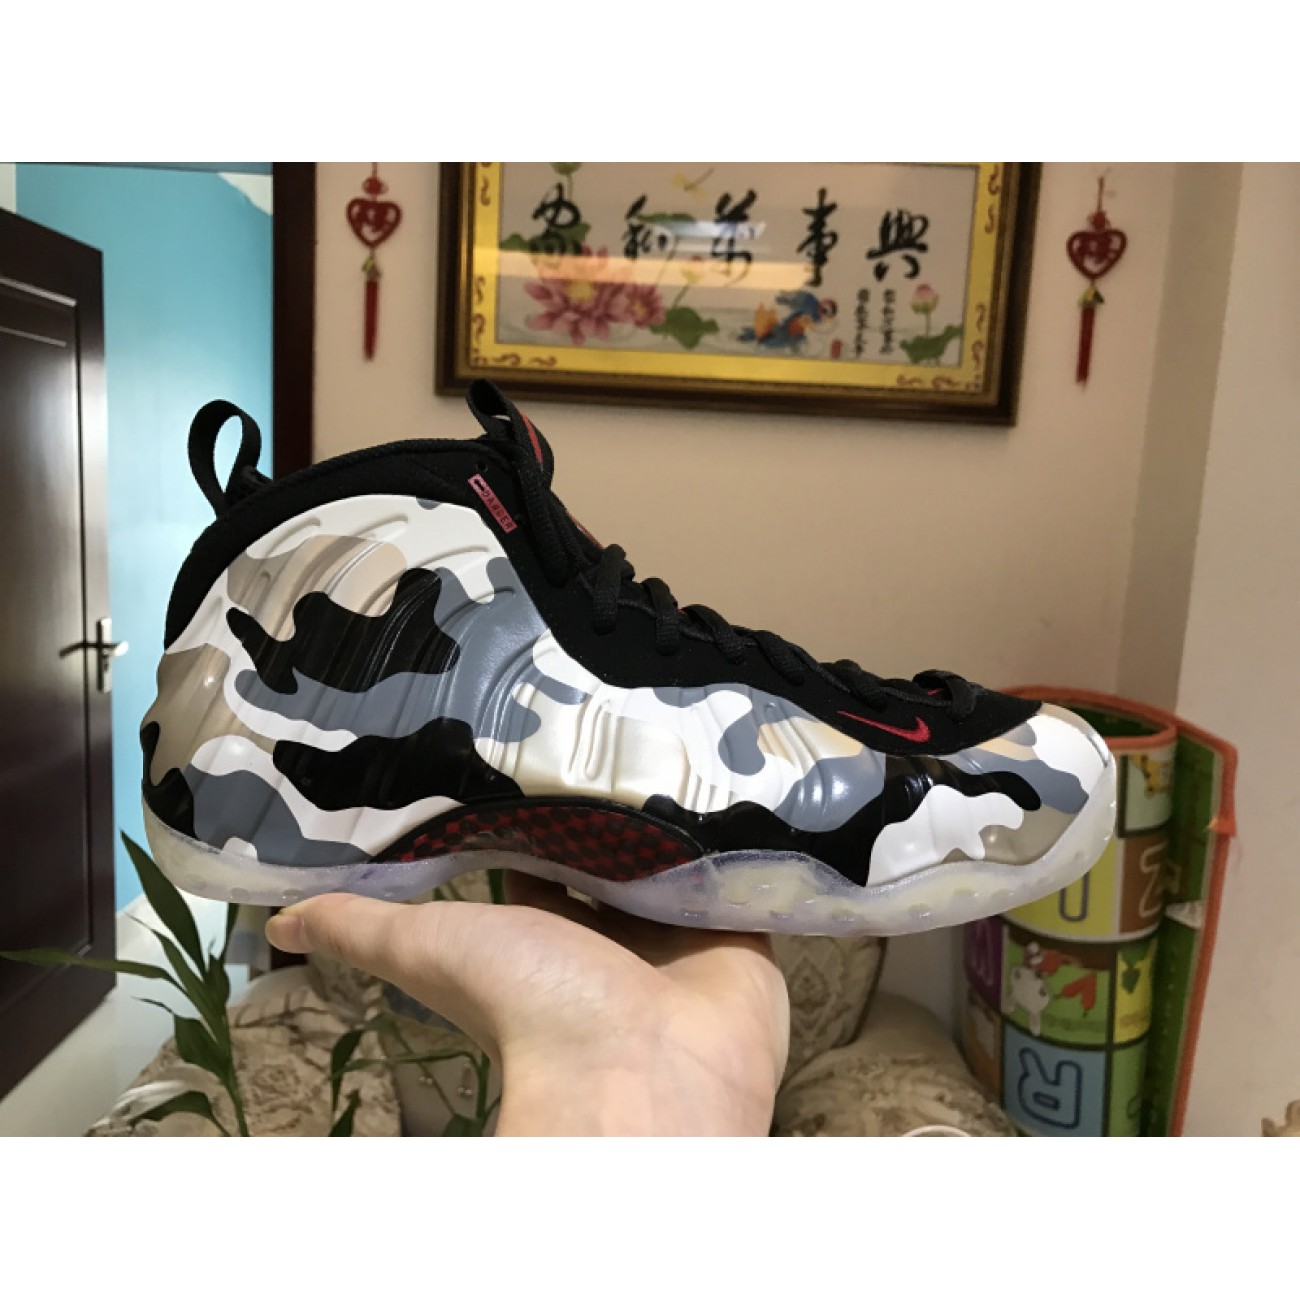 Nike Air Foamposite One PRM "Fighter Jet" 575420-001